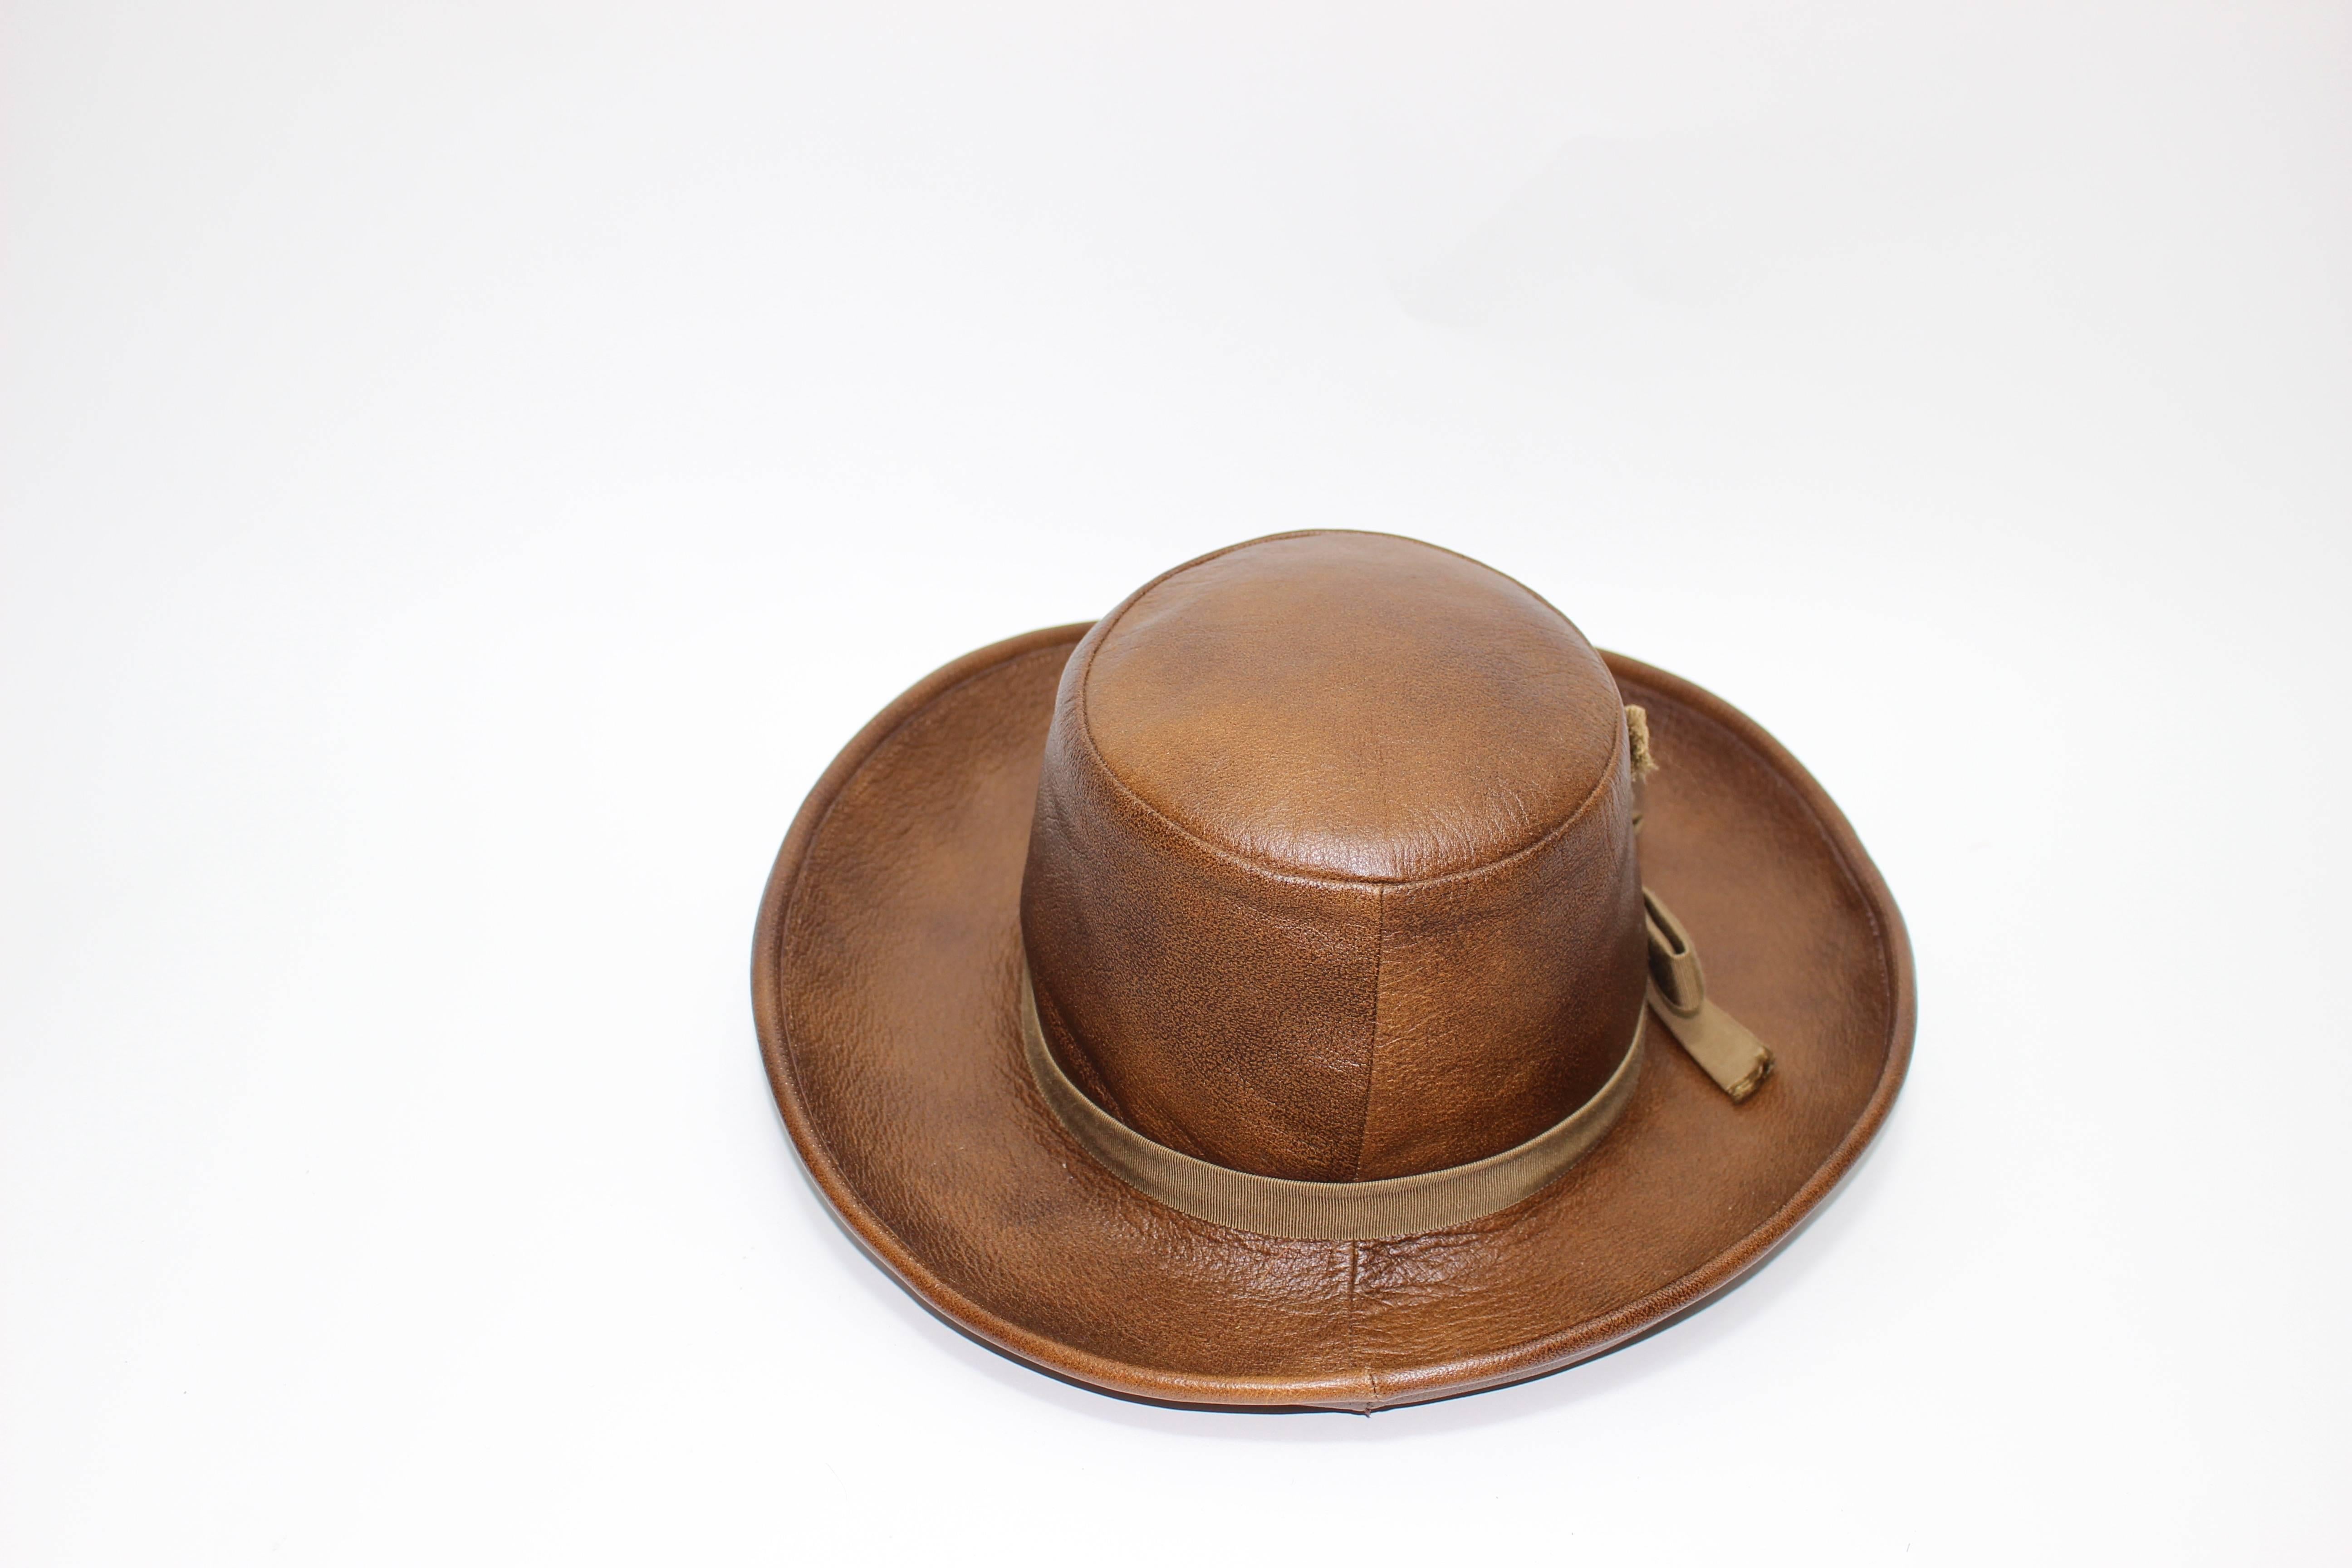 A brown leather Yves Saint Laurent hat.
Excellent condition

Measurements:
Brim: 3 and 1/4 inches 
Crown height: 4 inches
Inner circumference: 21.5 inches